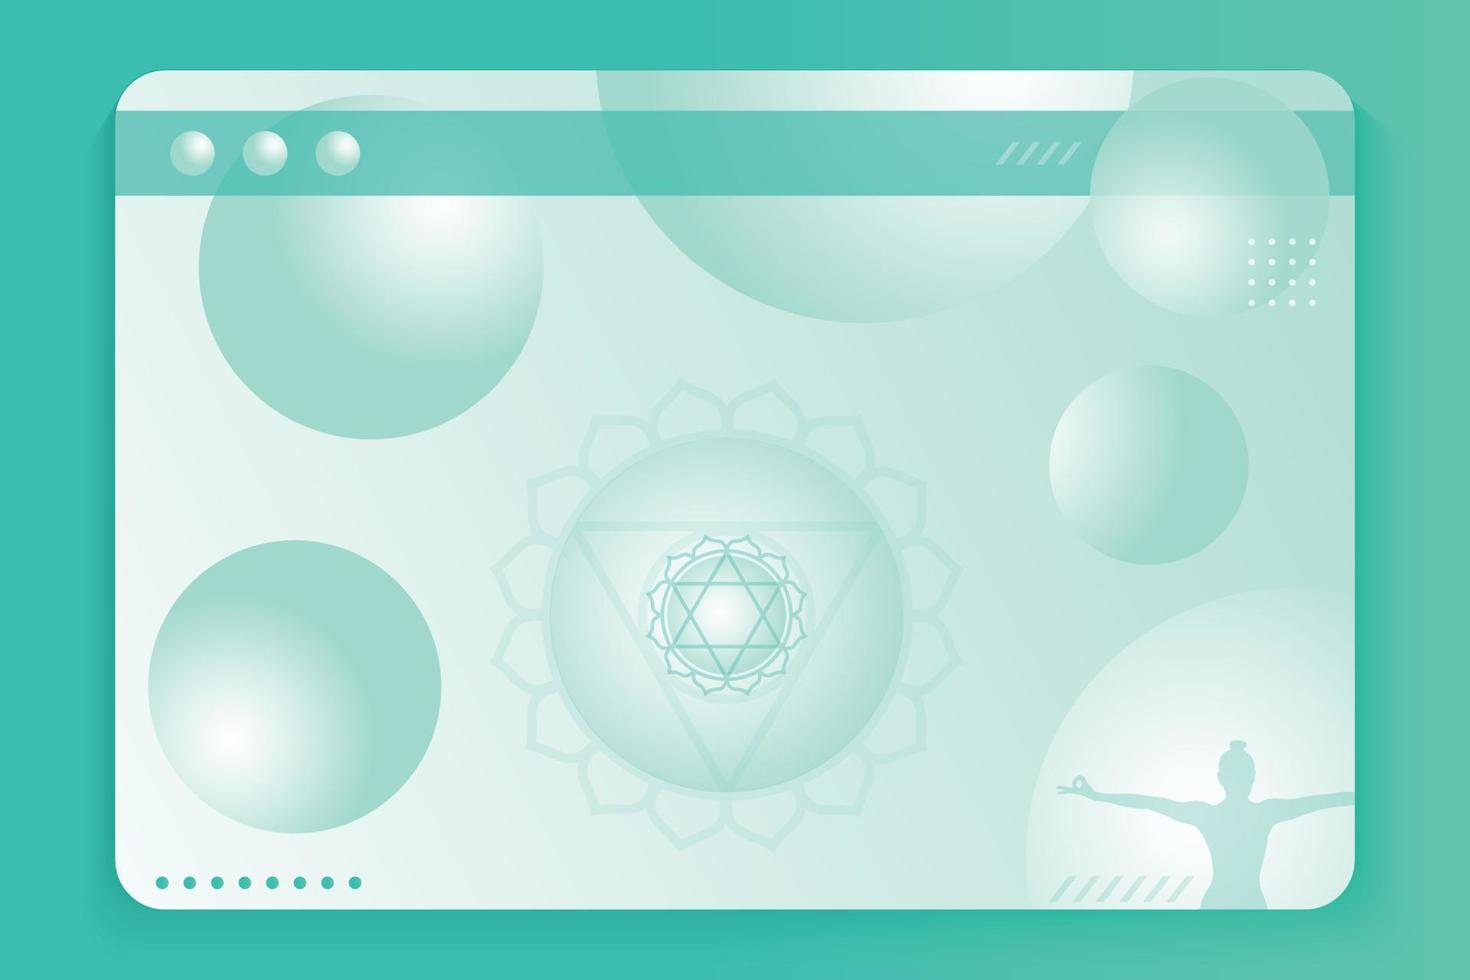 3D geometric web UI landing page free vector illustration concept for wellness and spa business